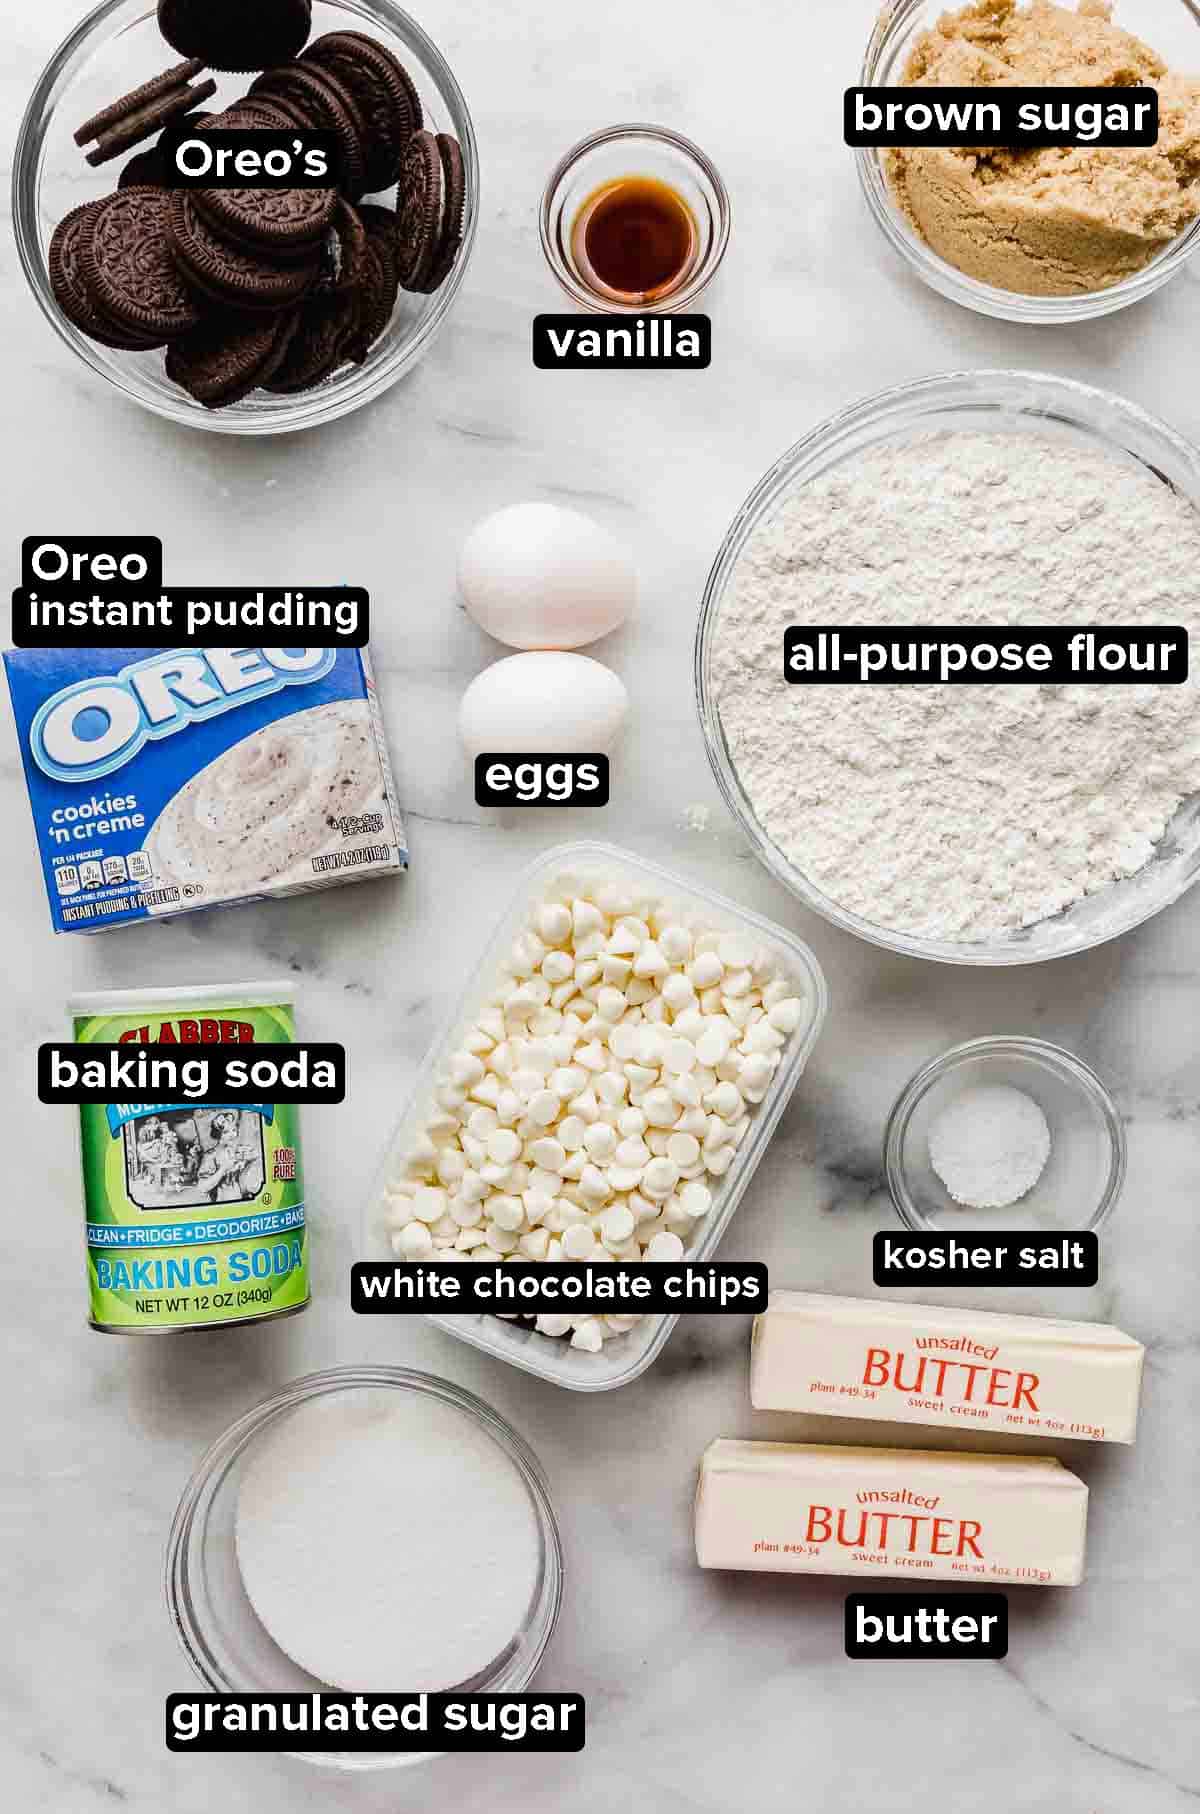 Cookies and Cream Cookies ingredients on a white background: Oreos, oreo pudding, flour, butter, white chocolate chips, eggs, sugar, and leavening agents.